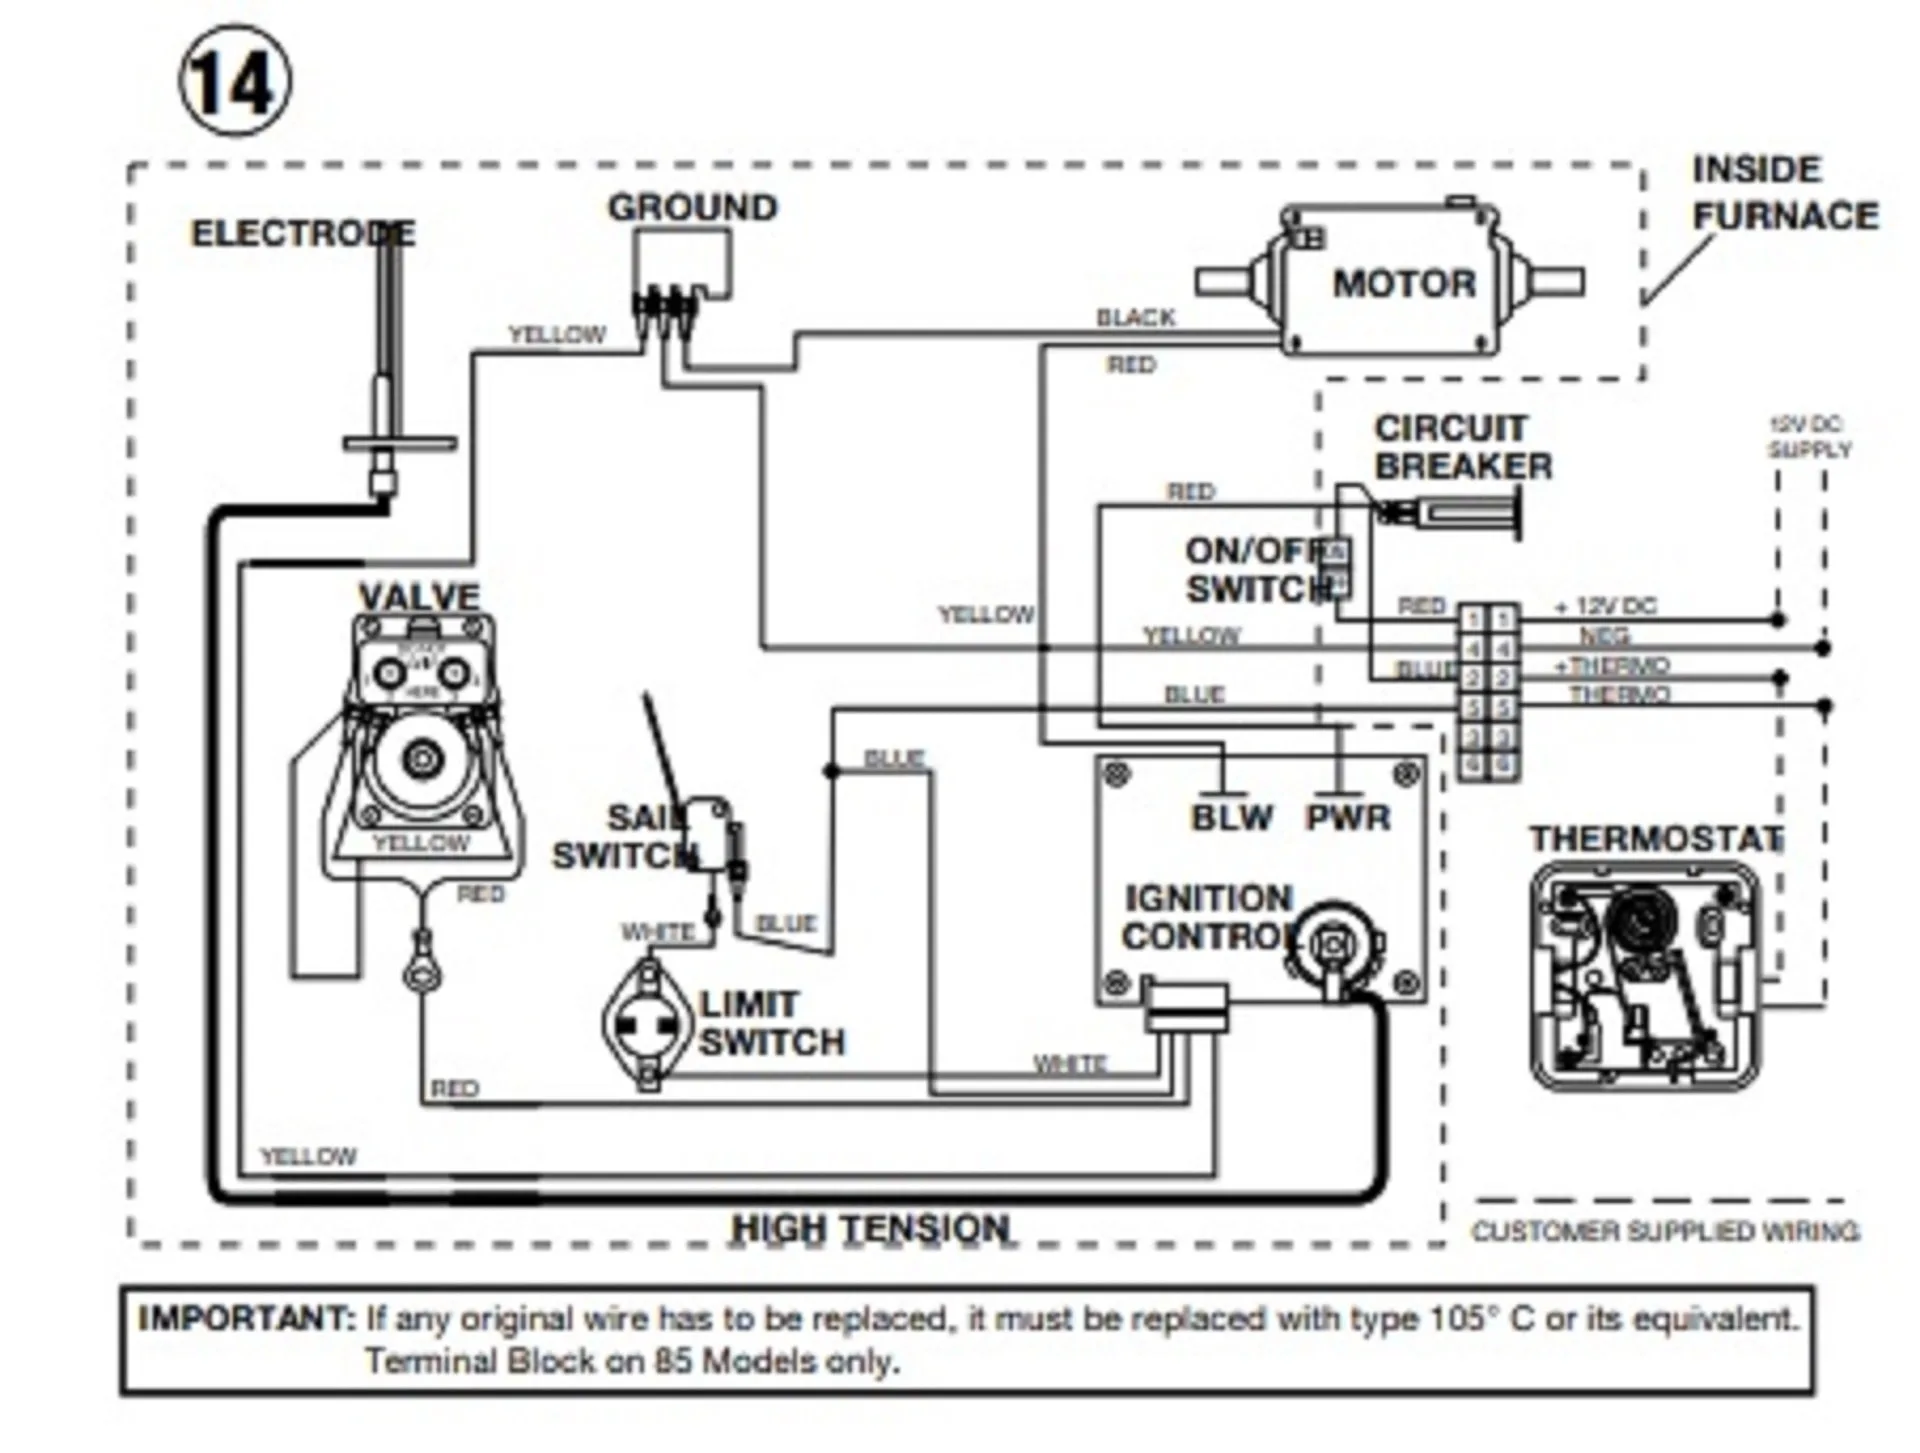 The wiring schematic for an Atwood/Dometic RV furnace. (Diagram and photo credit: Atwood/Dometic)